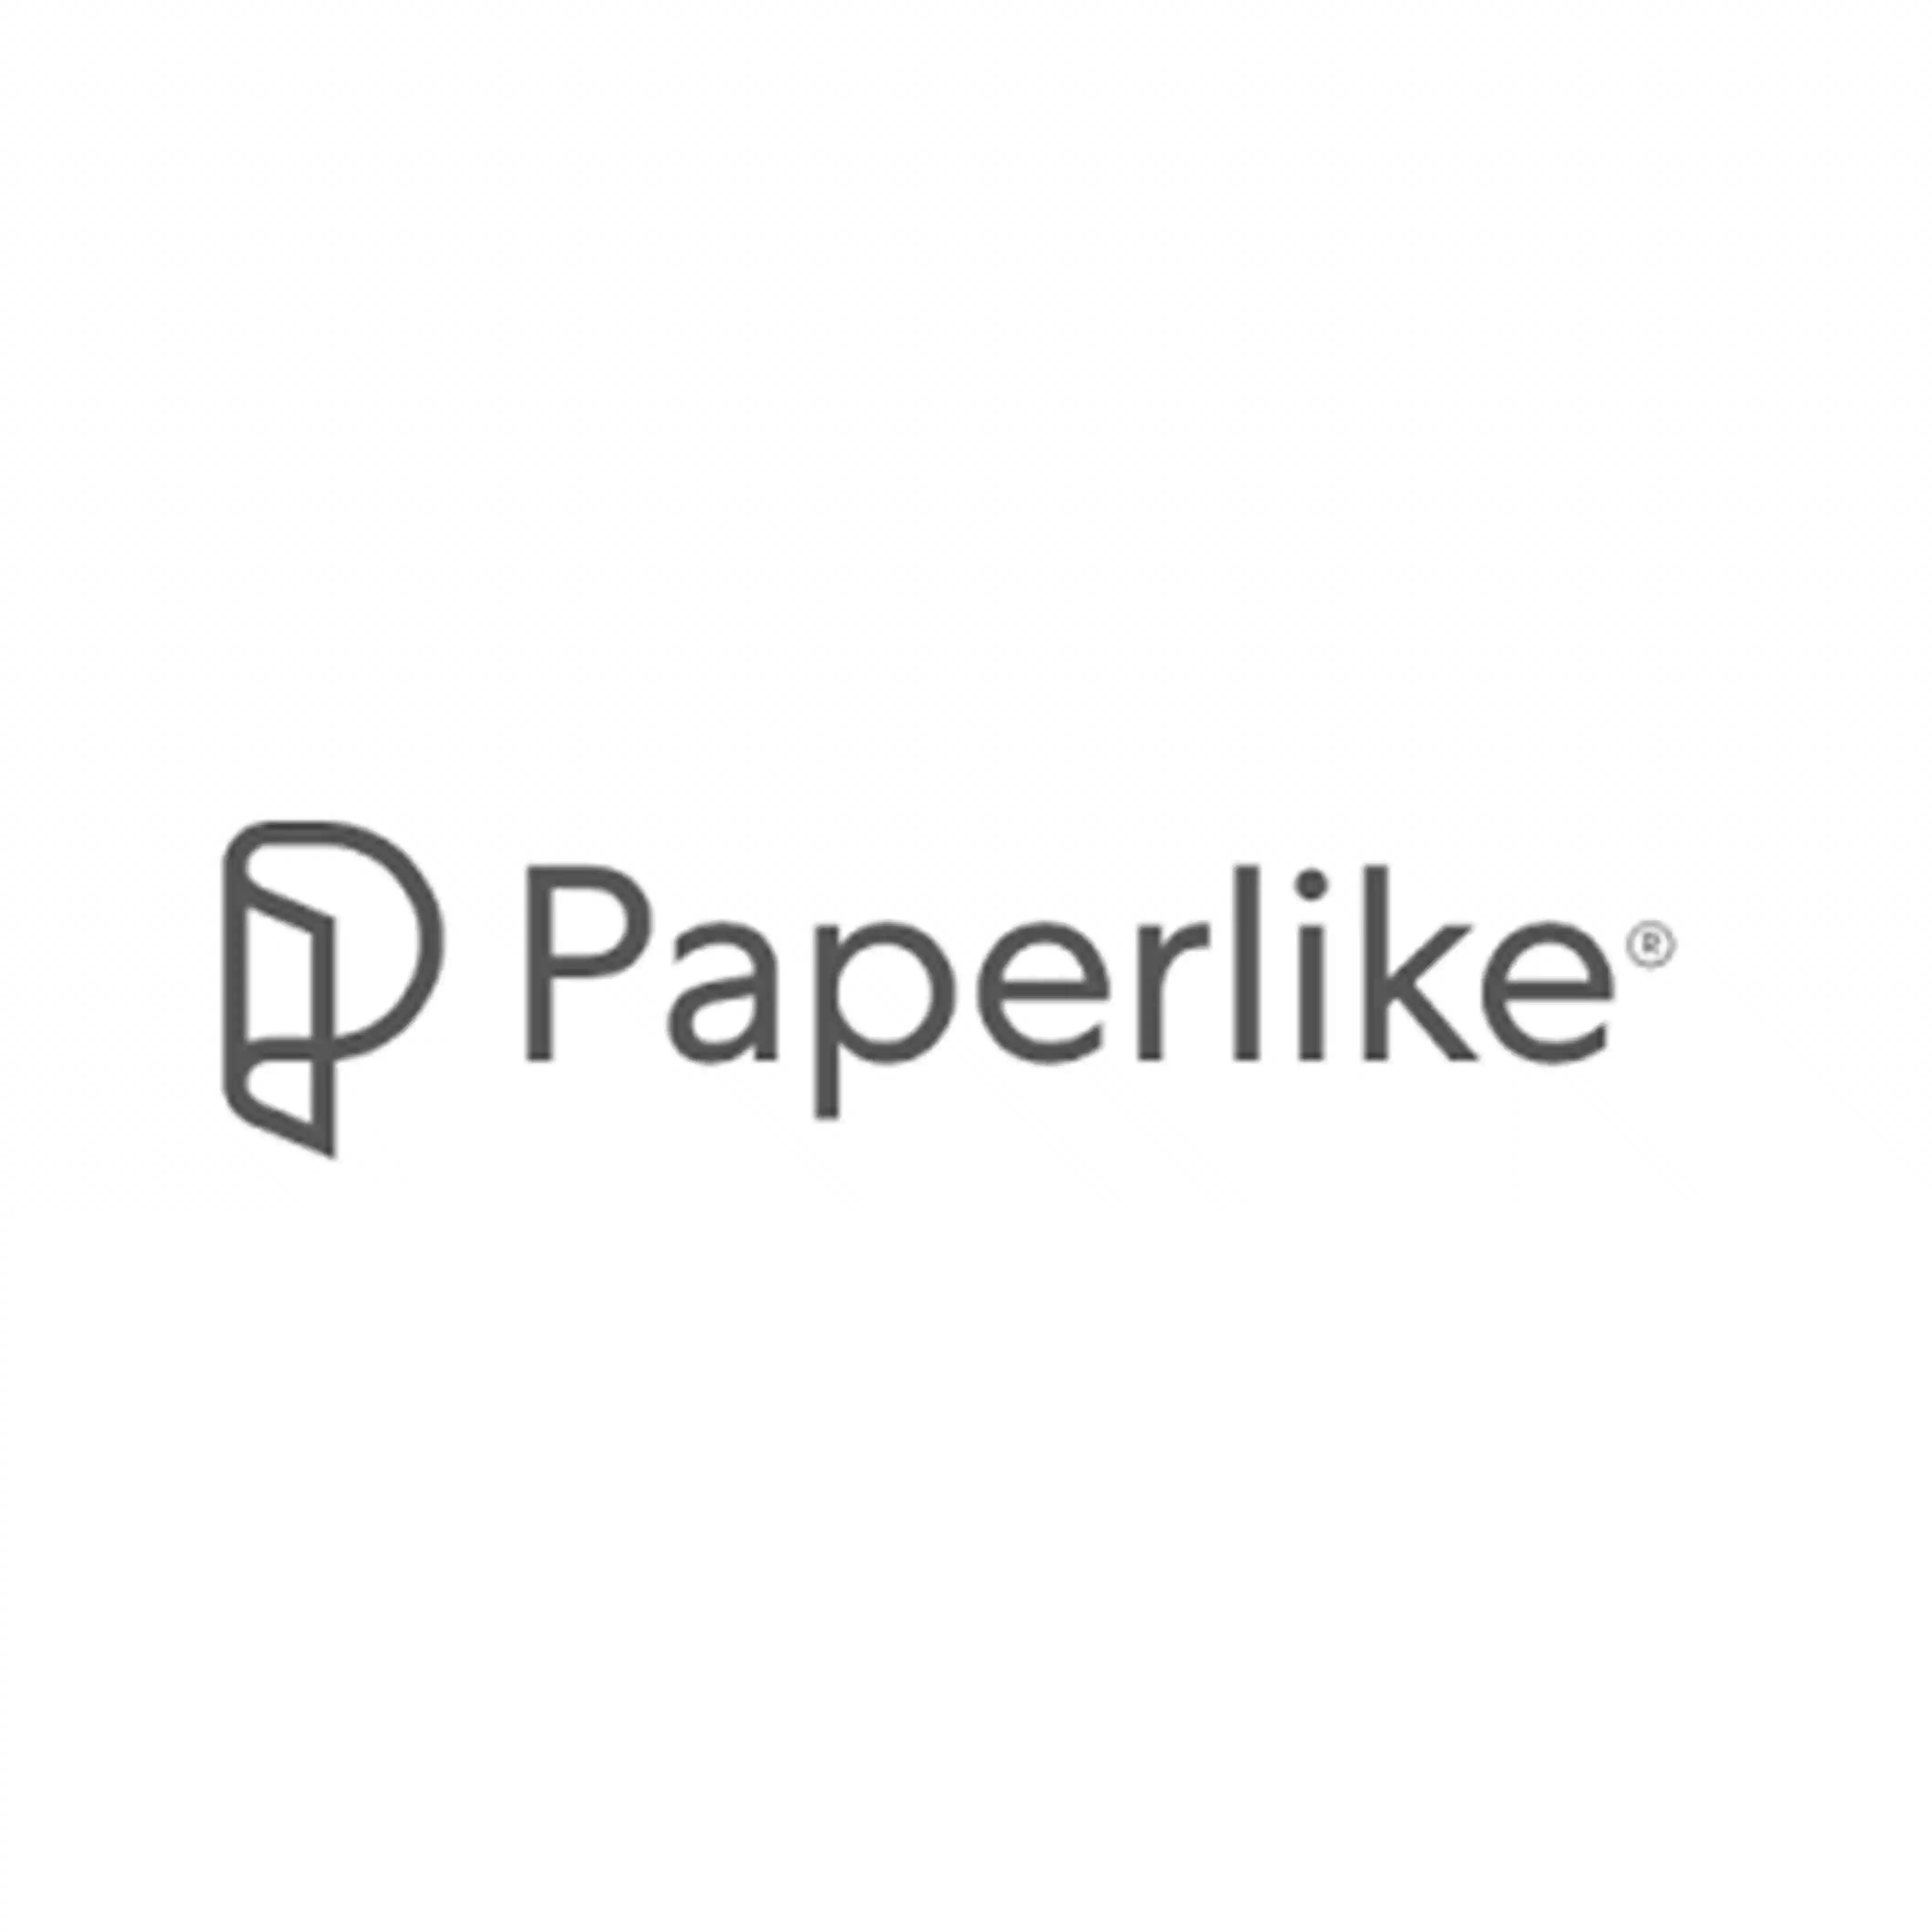 PaperLike coupon codes